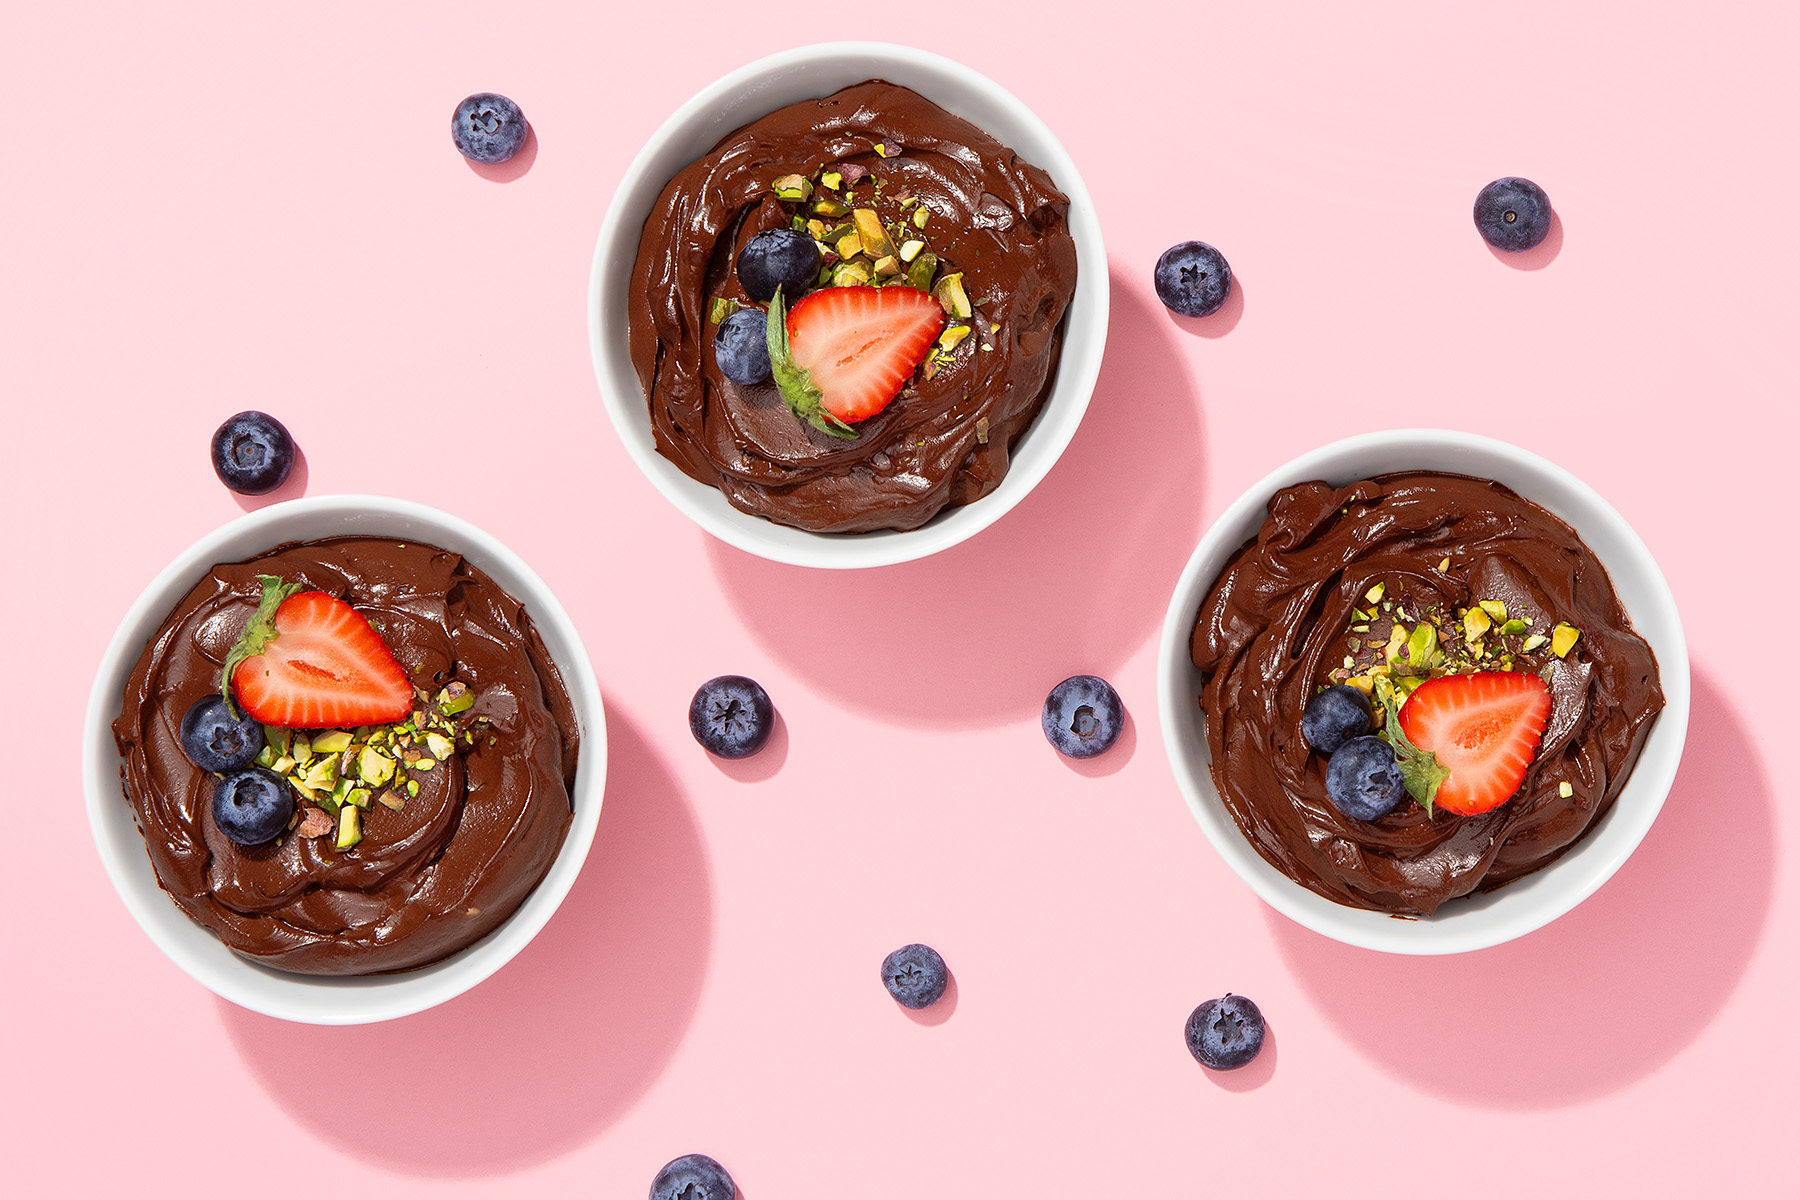 three bowls of coffee mocha avocado pudding with fresh berries and pistachio